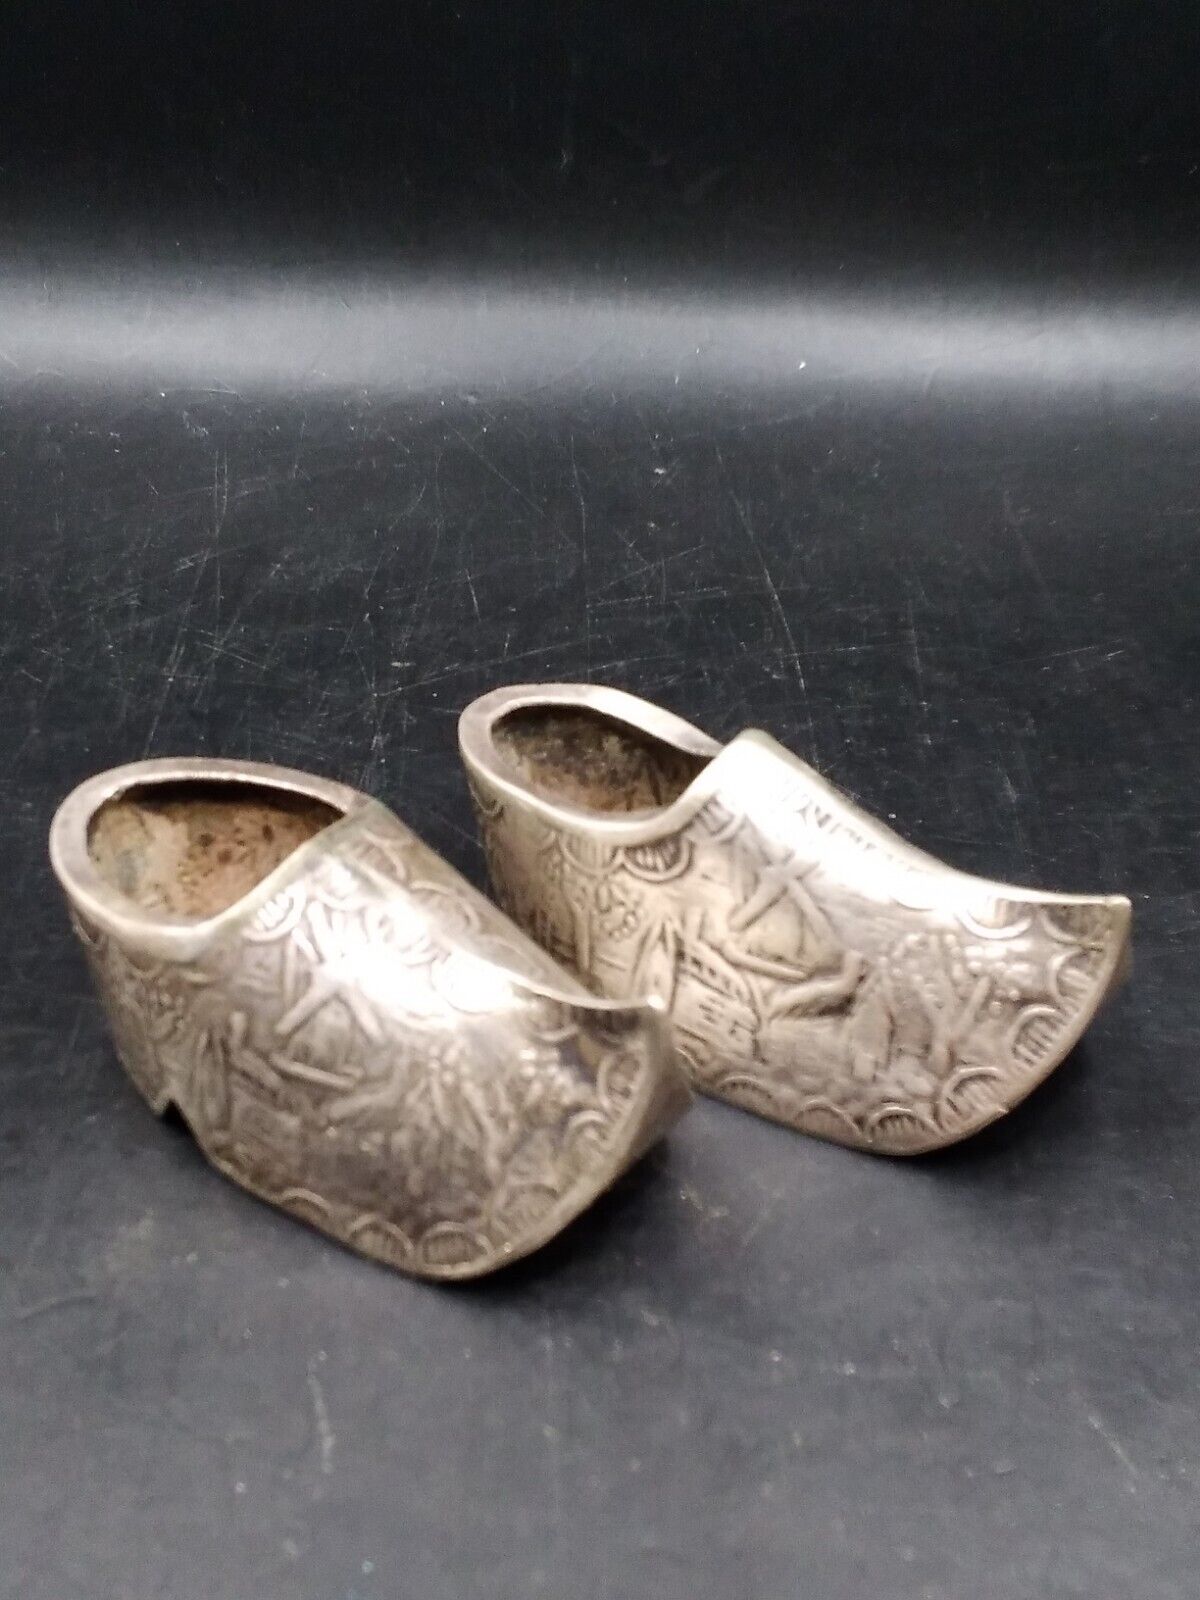 Unusual Vintage Silver Tested Clogs/Shoes Marked Brv12